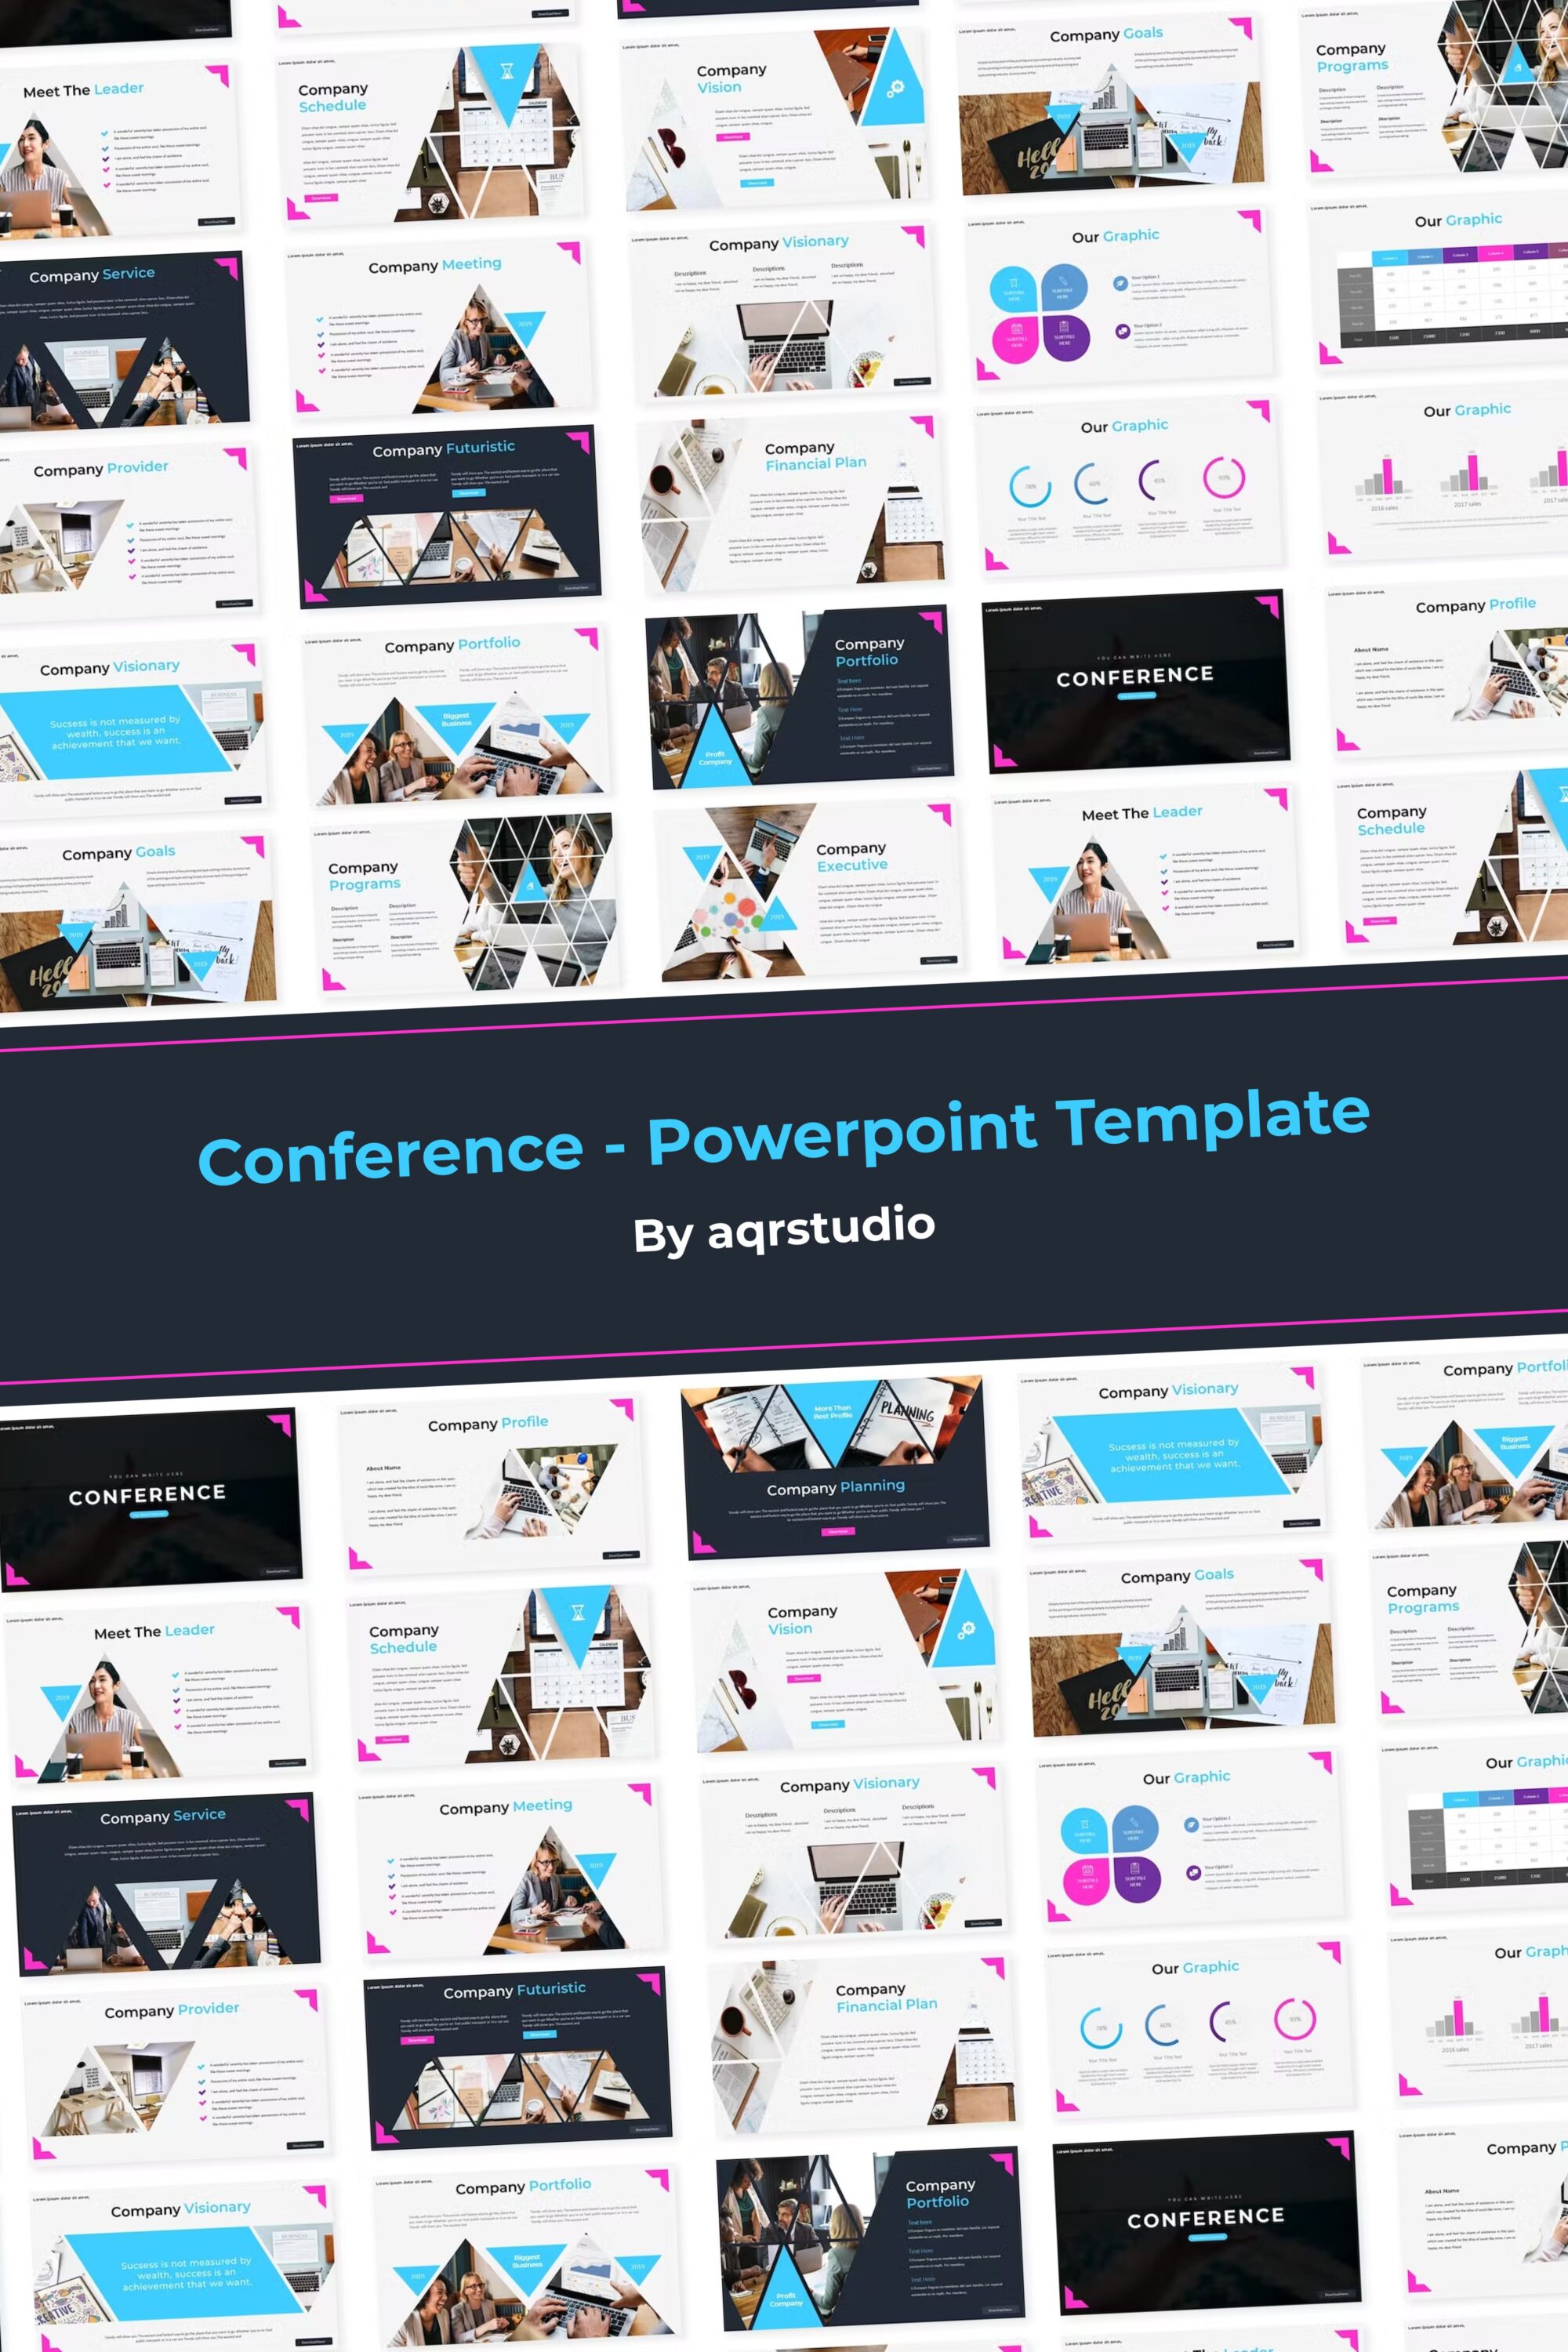 Conference powerpoint template of pinterest.